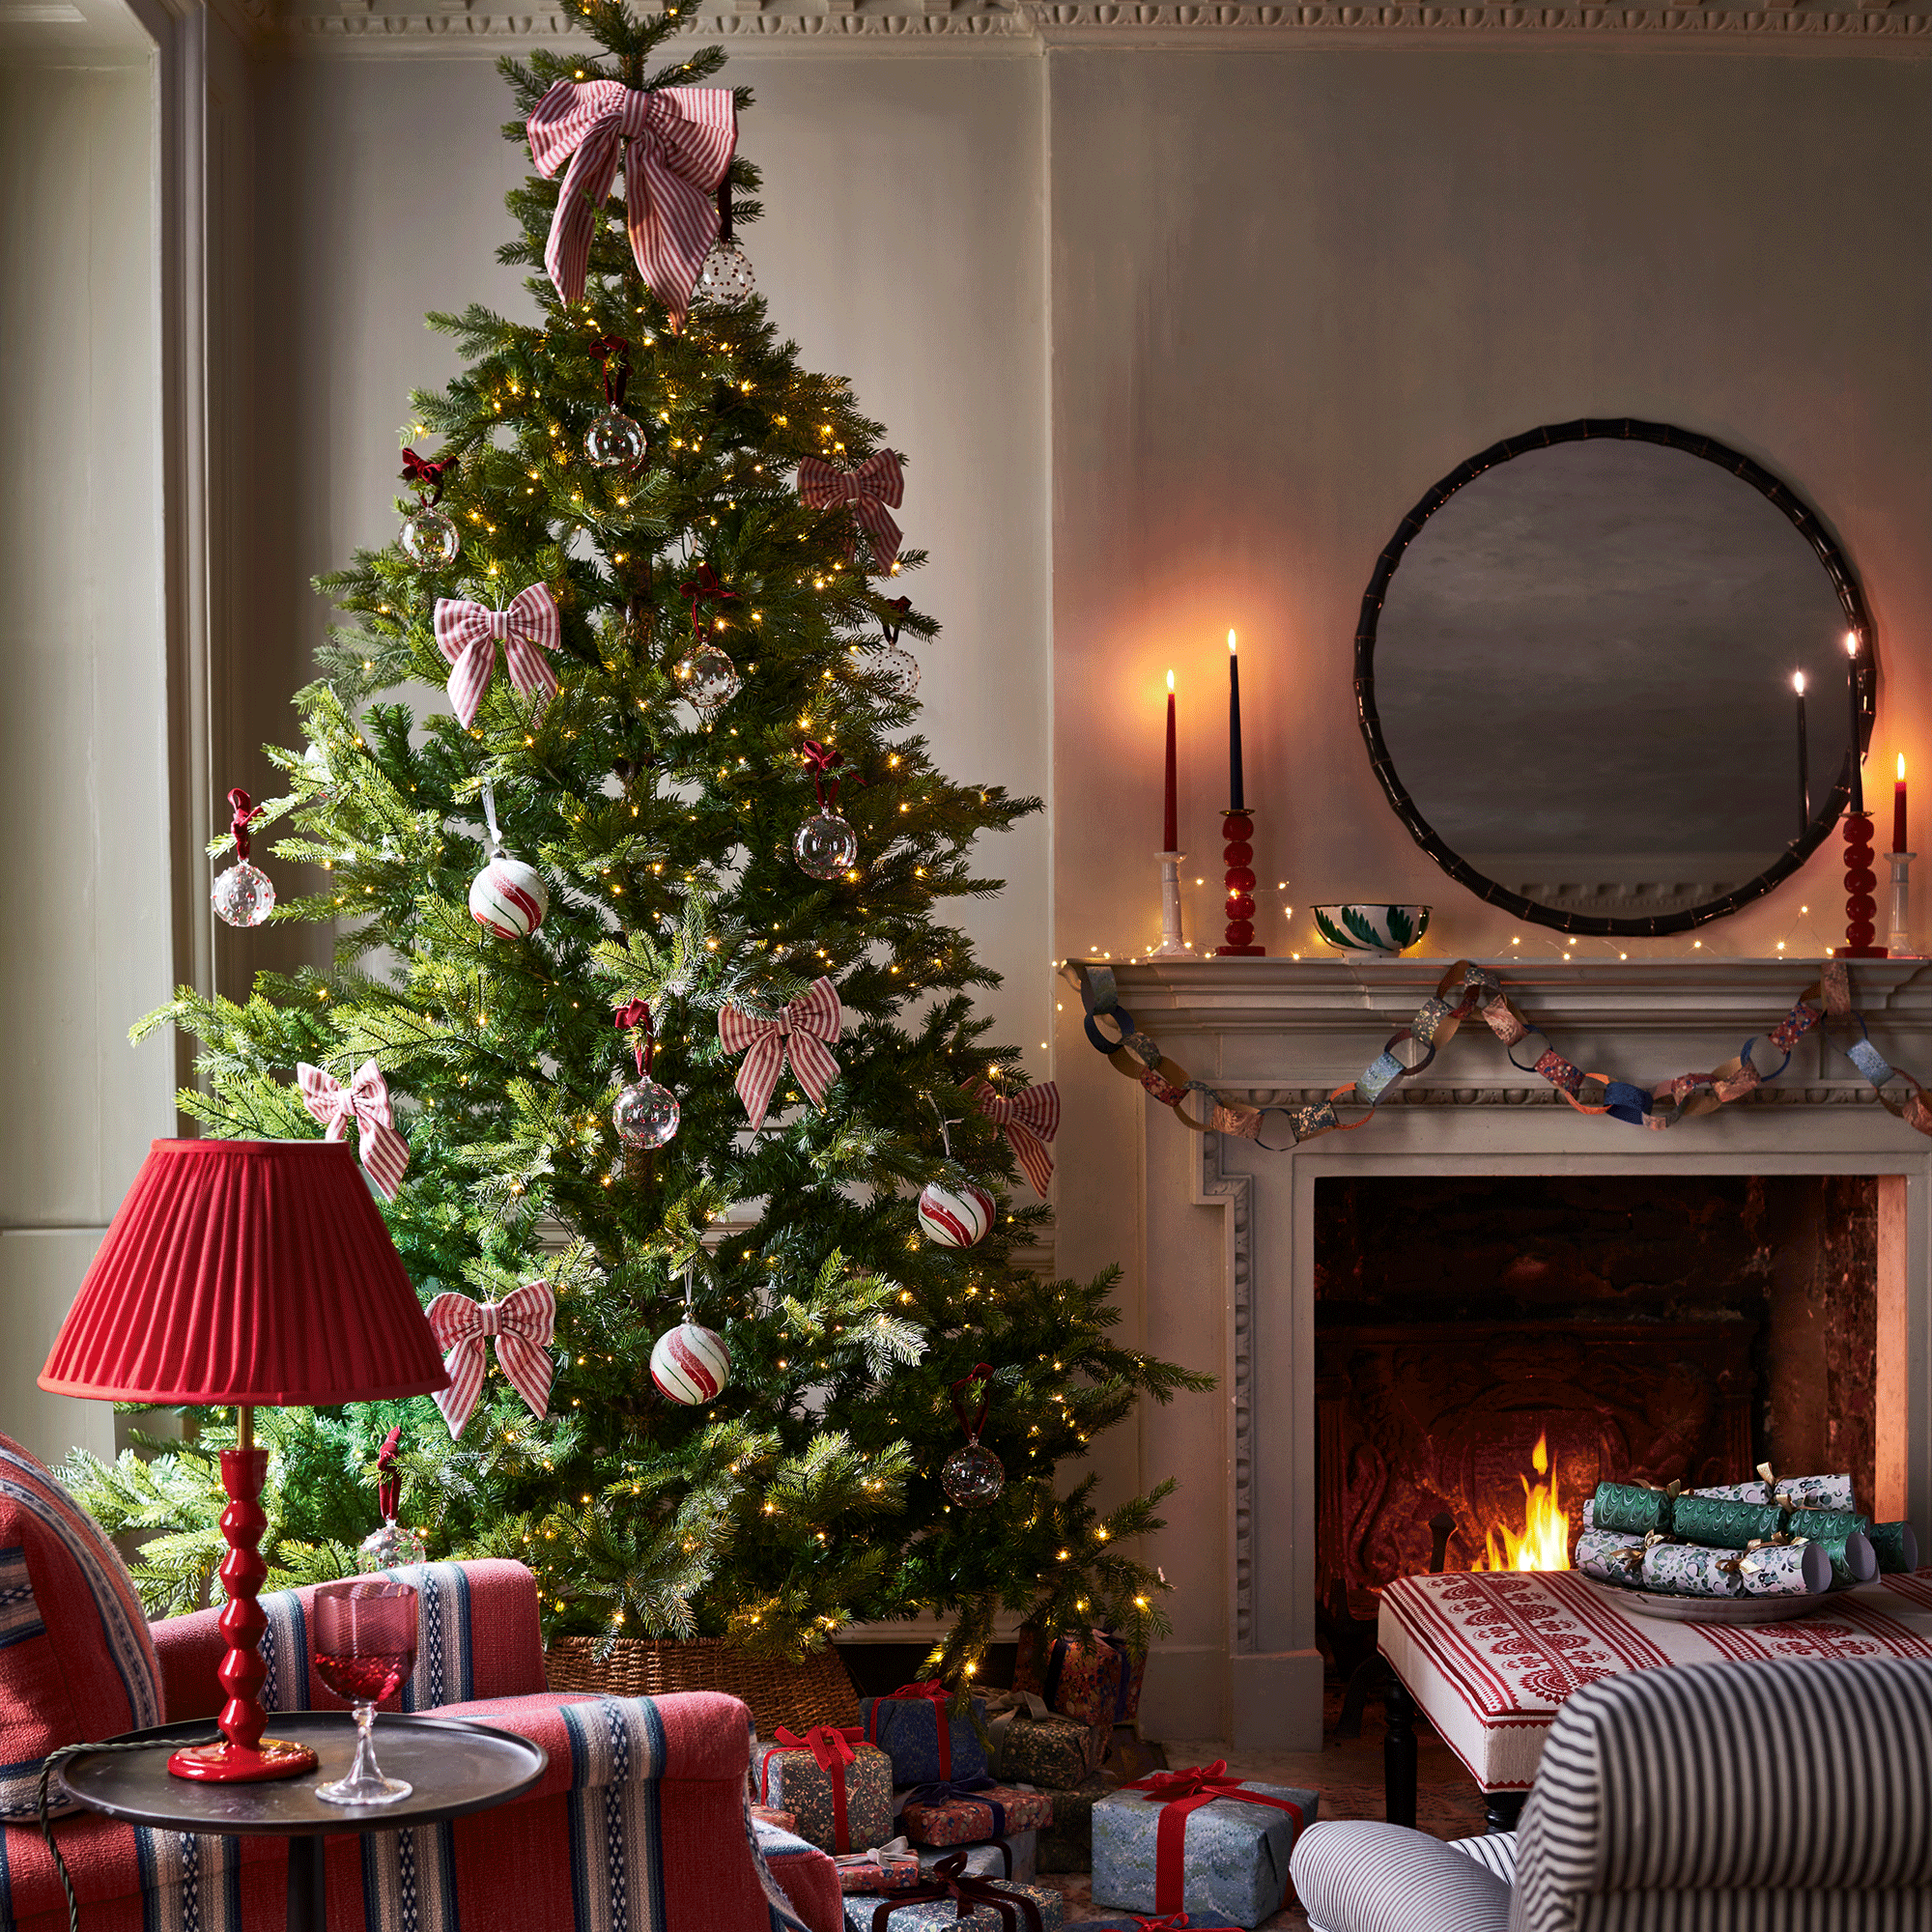 41 budget Christmas decorating ideas - affordable ways to create a fabulously festive home